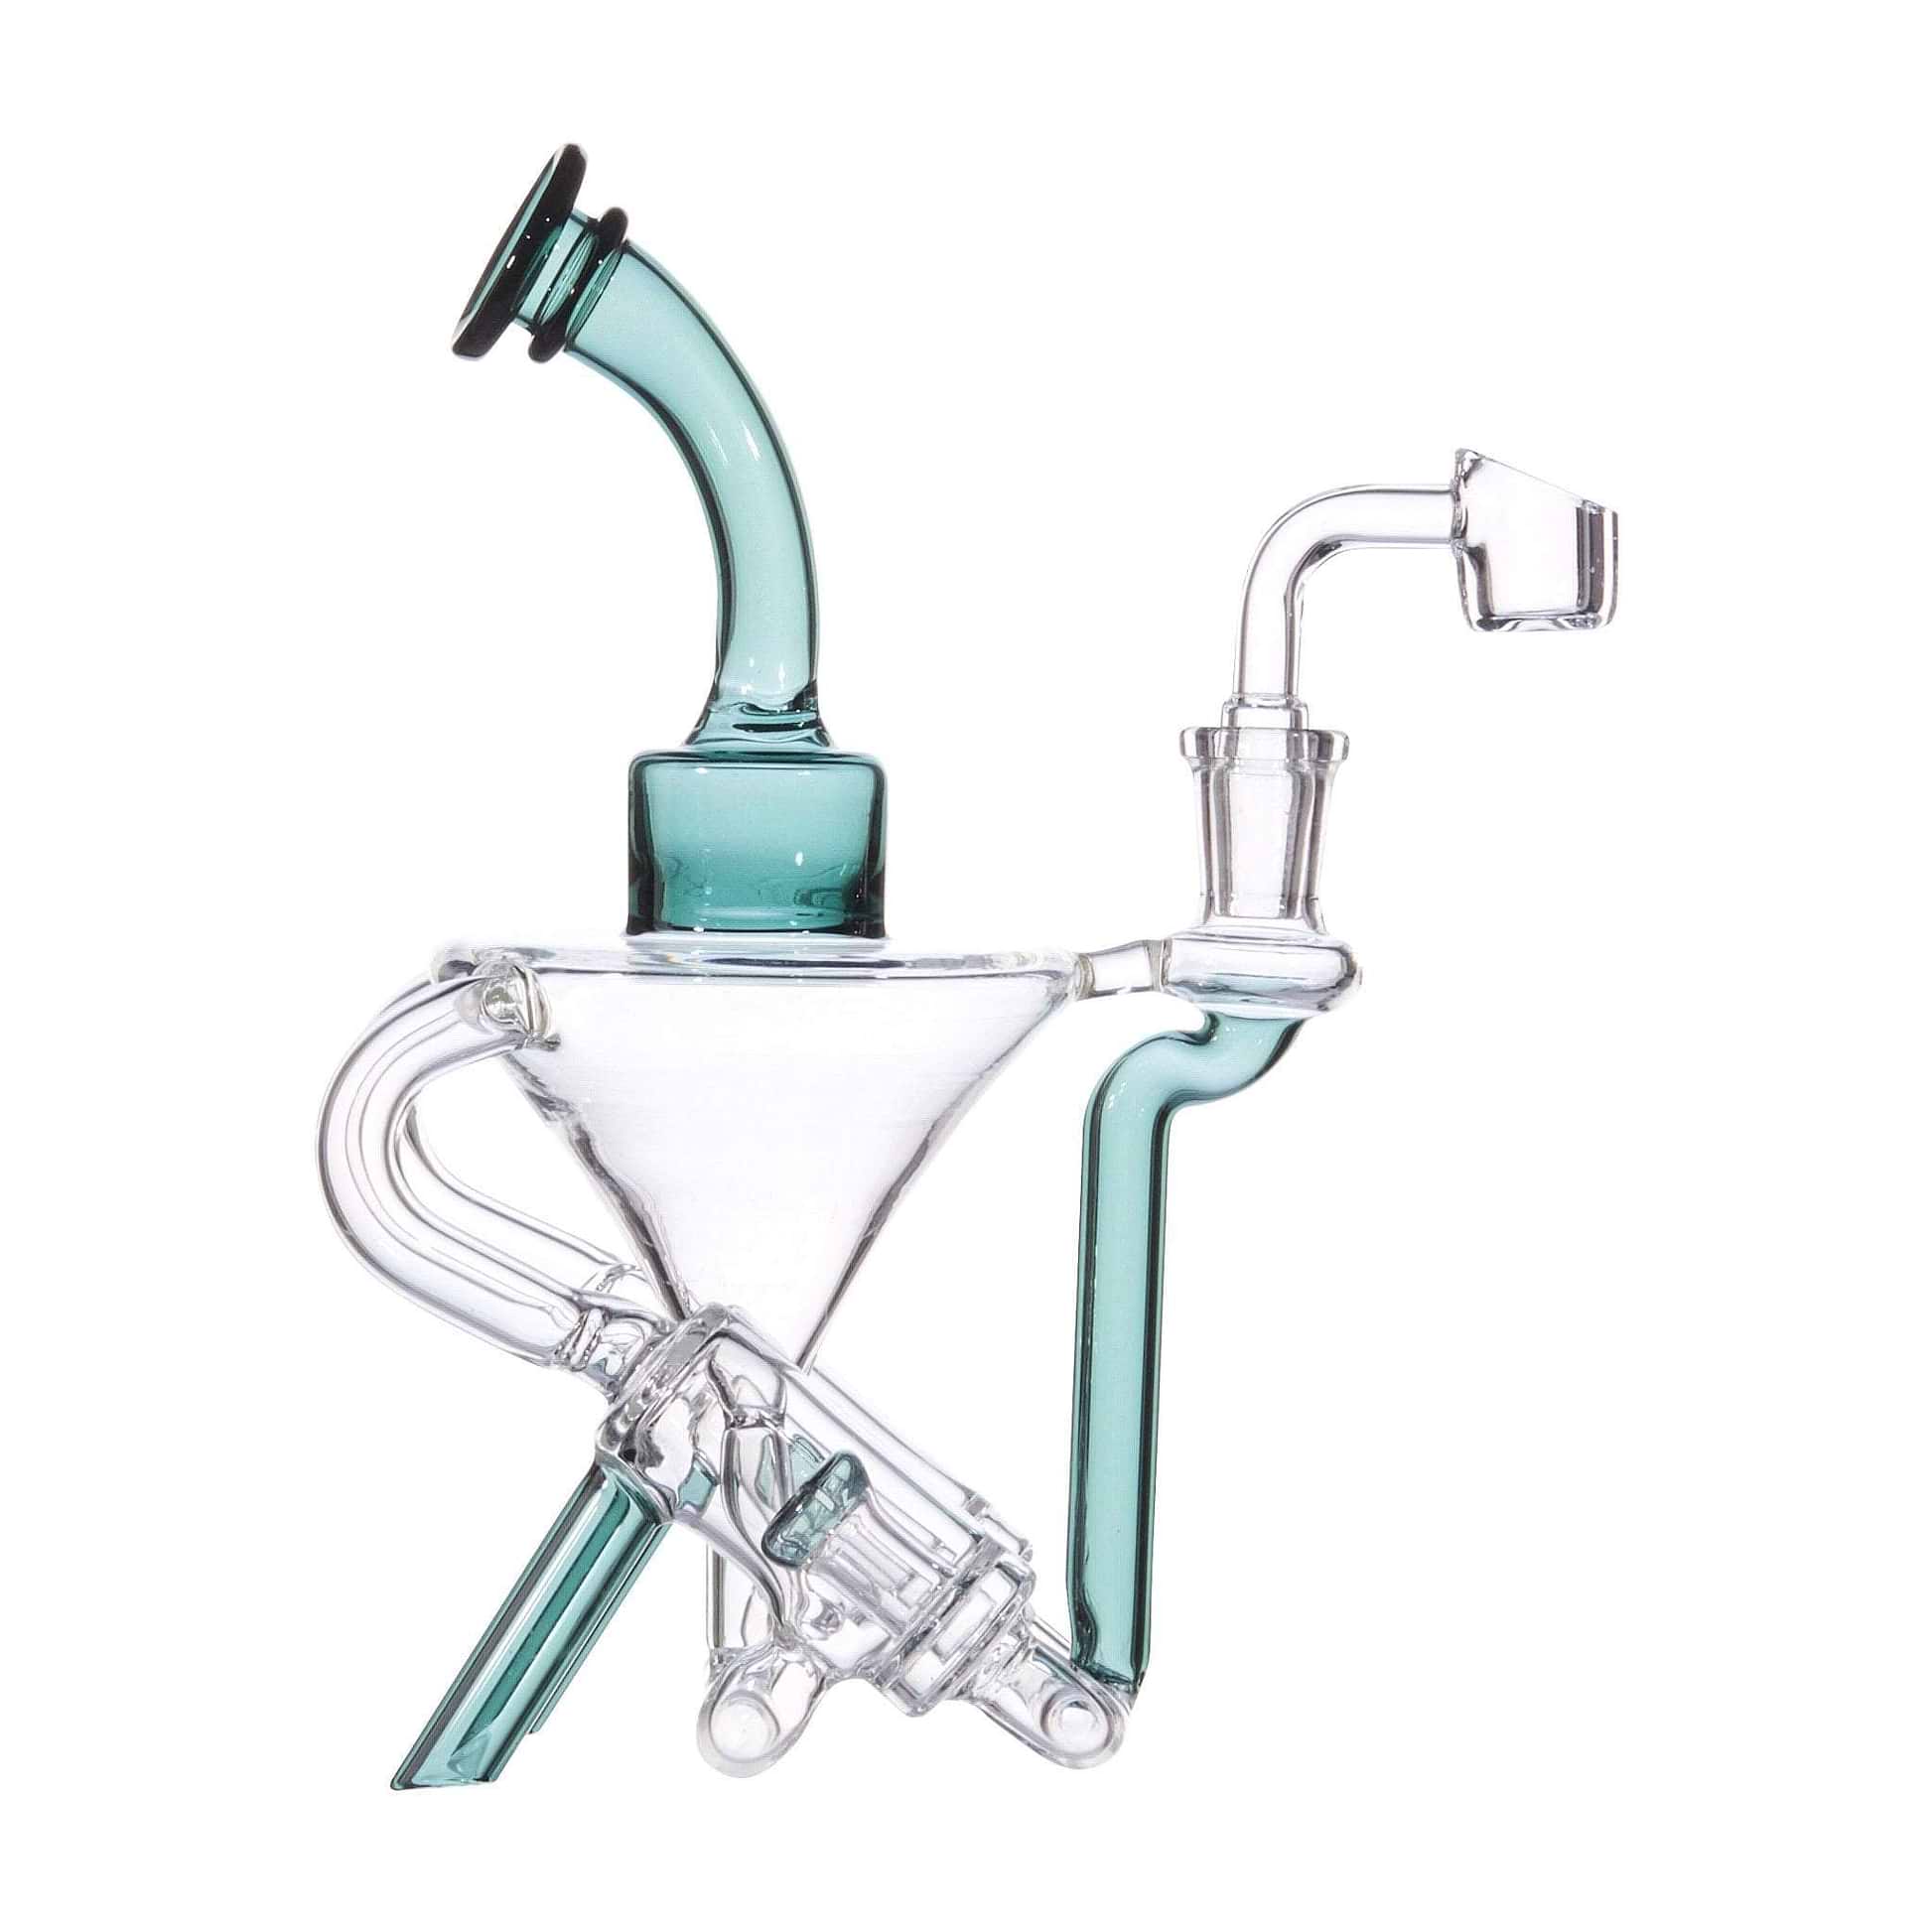 8-inch glass dab rig smoking device built in downstem 2 showerhead percs horse carriage-inspired